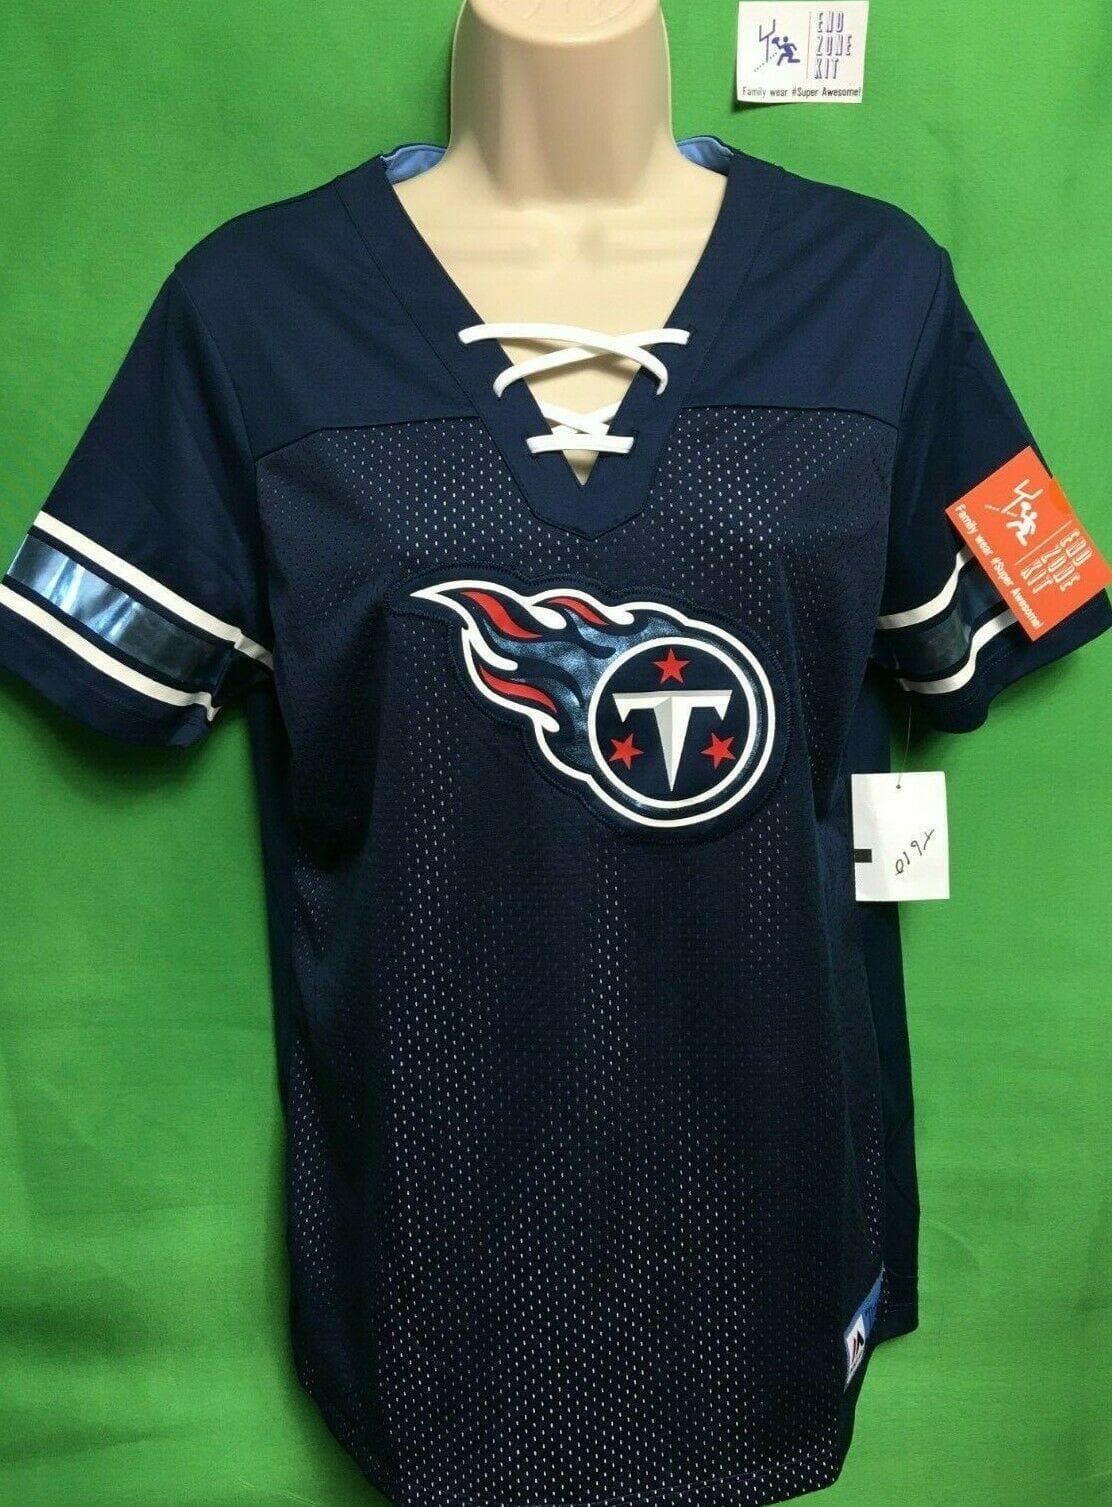 NFL Tennessee Titans Majestic Lace-Up Women's Medium Jersey Top NWT